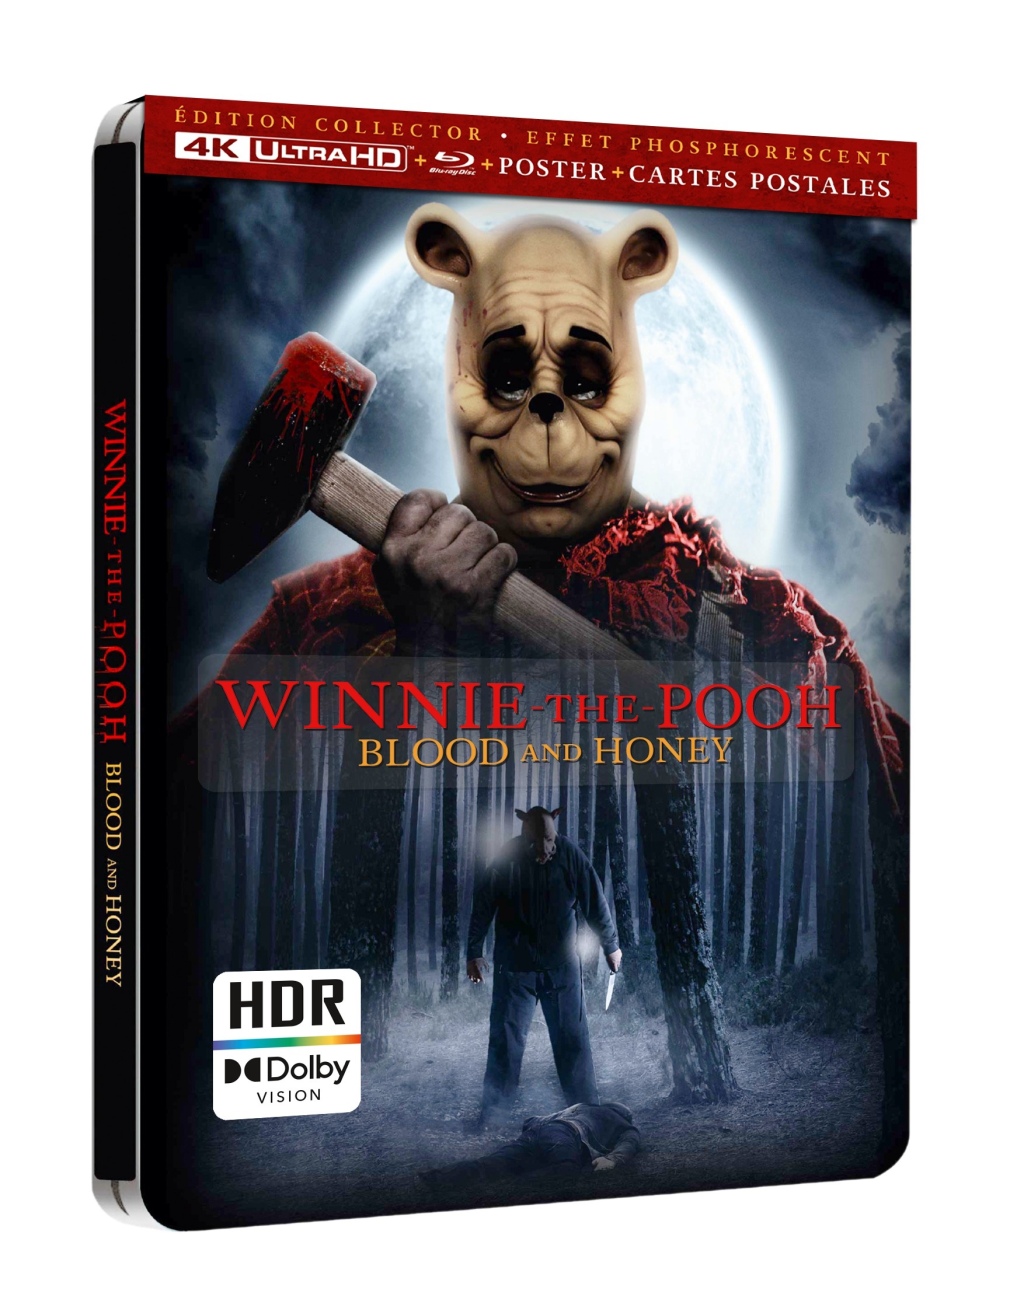 Winnie The Pooh, Blood And Honey : Critique et Test Blu-Ray